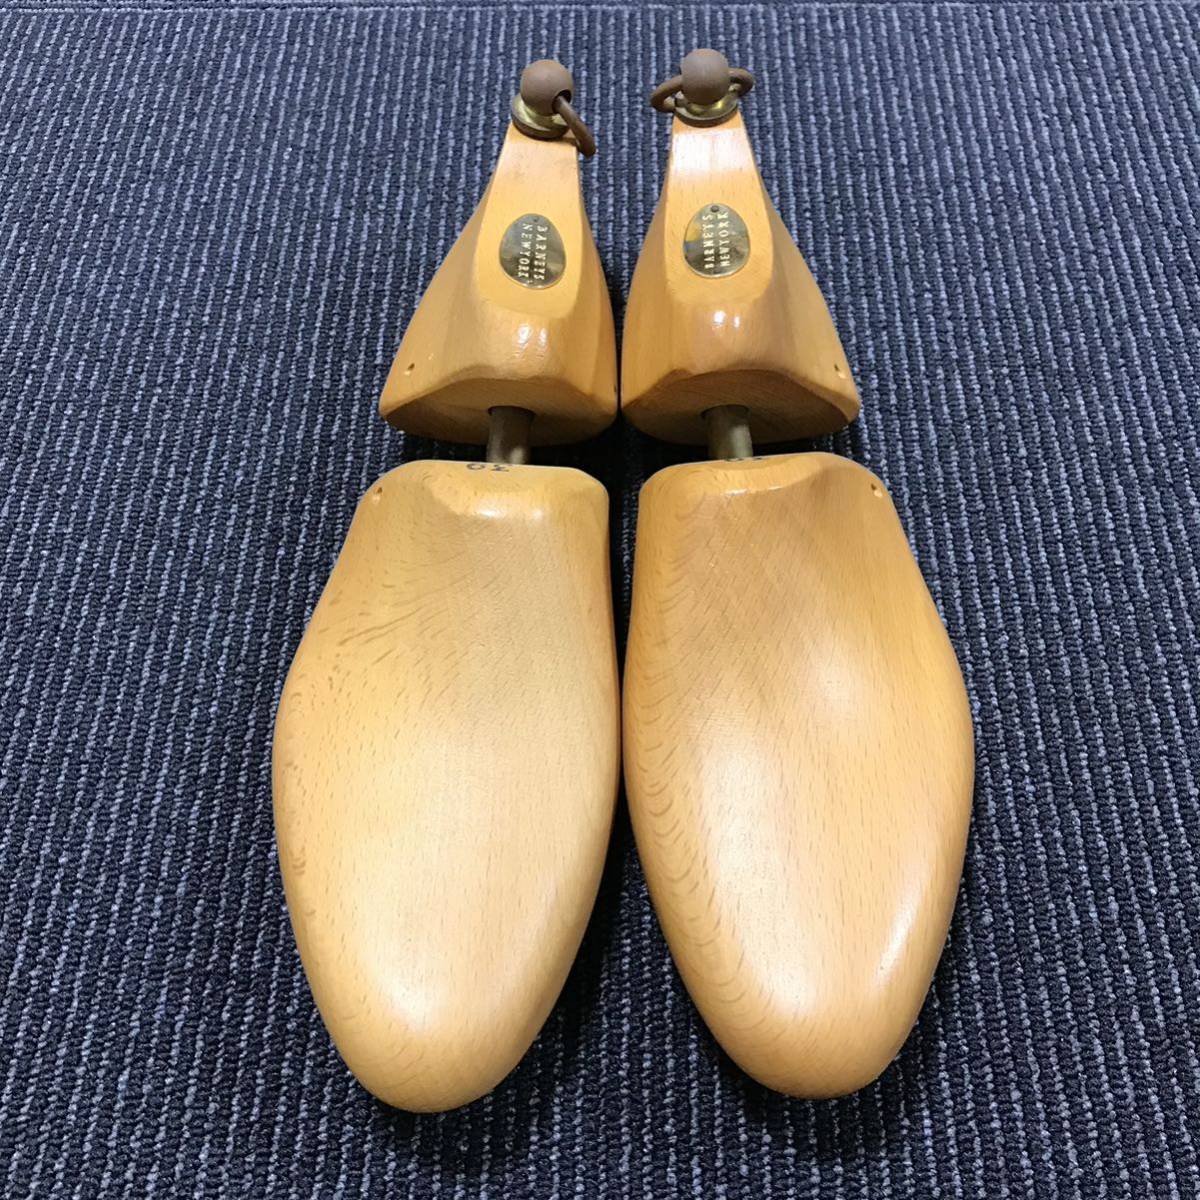 [ Barneys New York ] genuine article BARNEYS NEWYORK shoe tree shoe keeper wooden size 39 shoes shoes keeper for man men's 